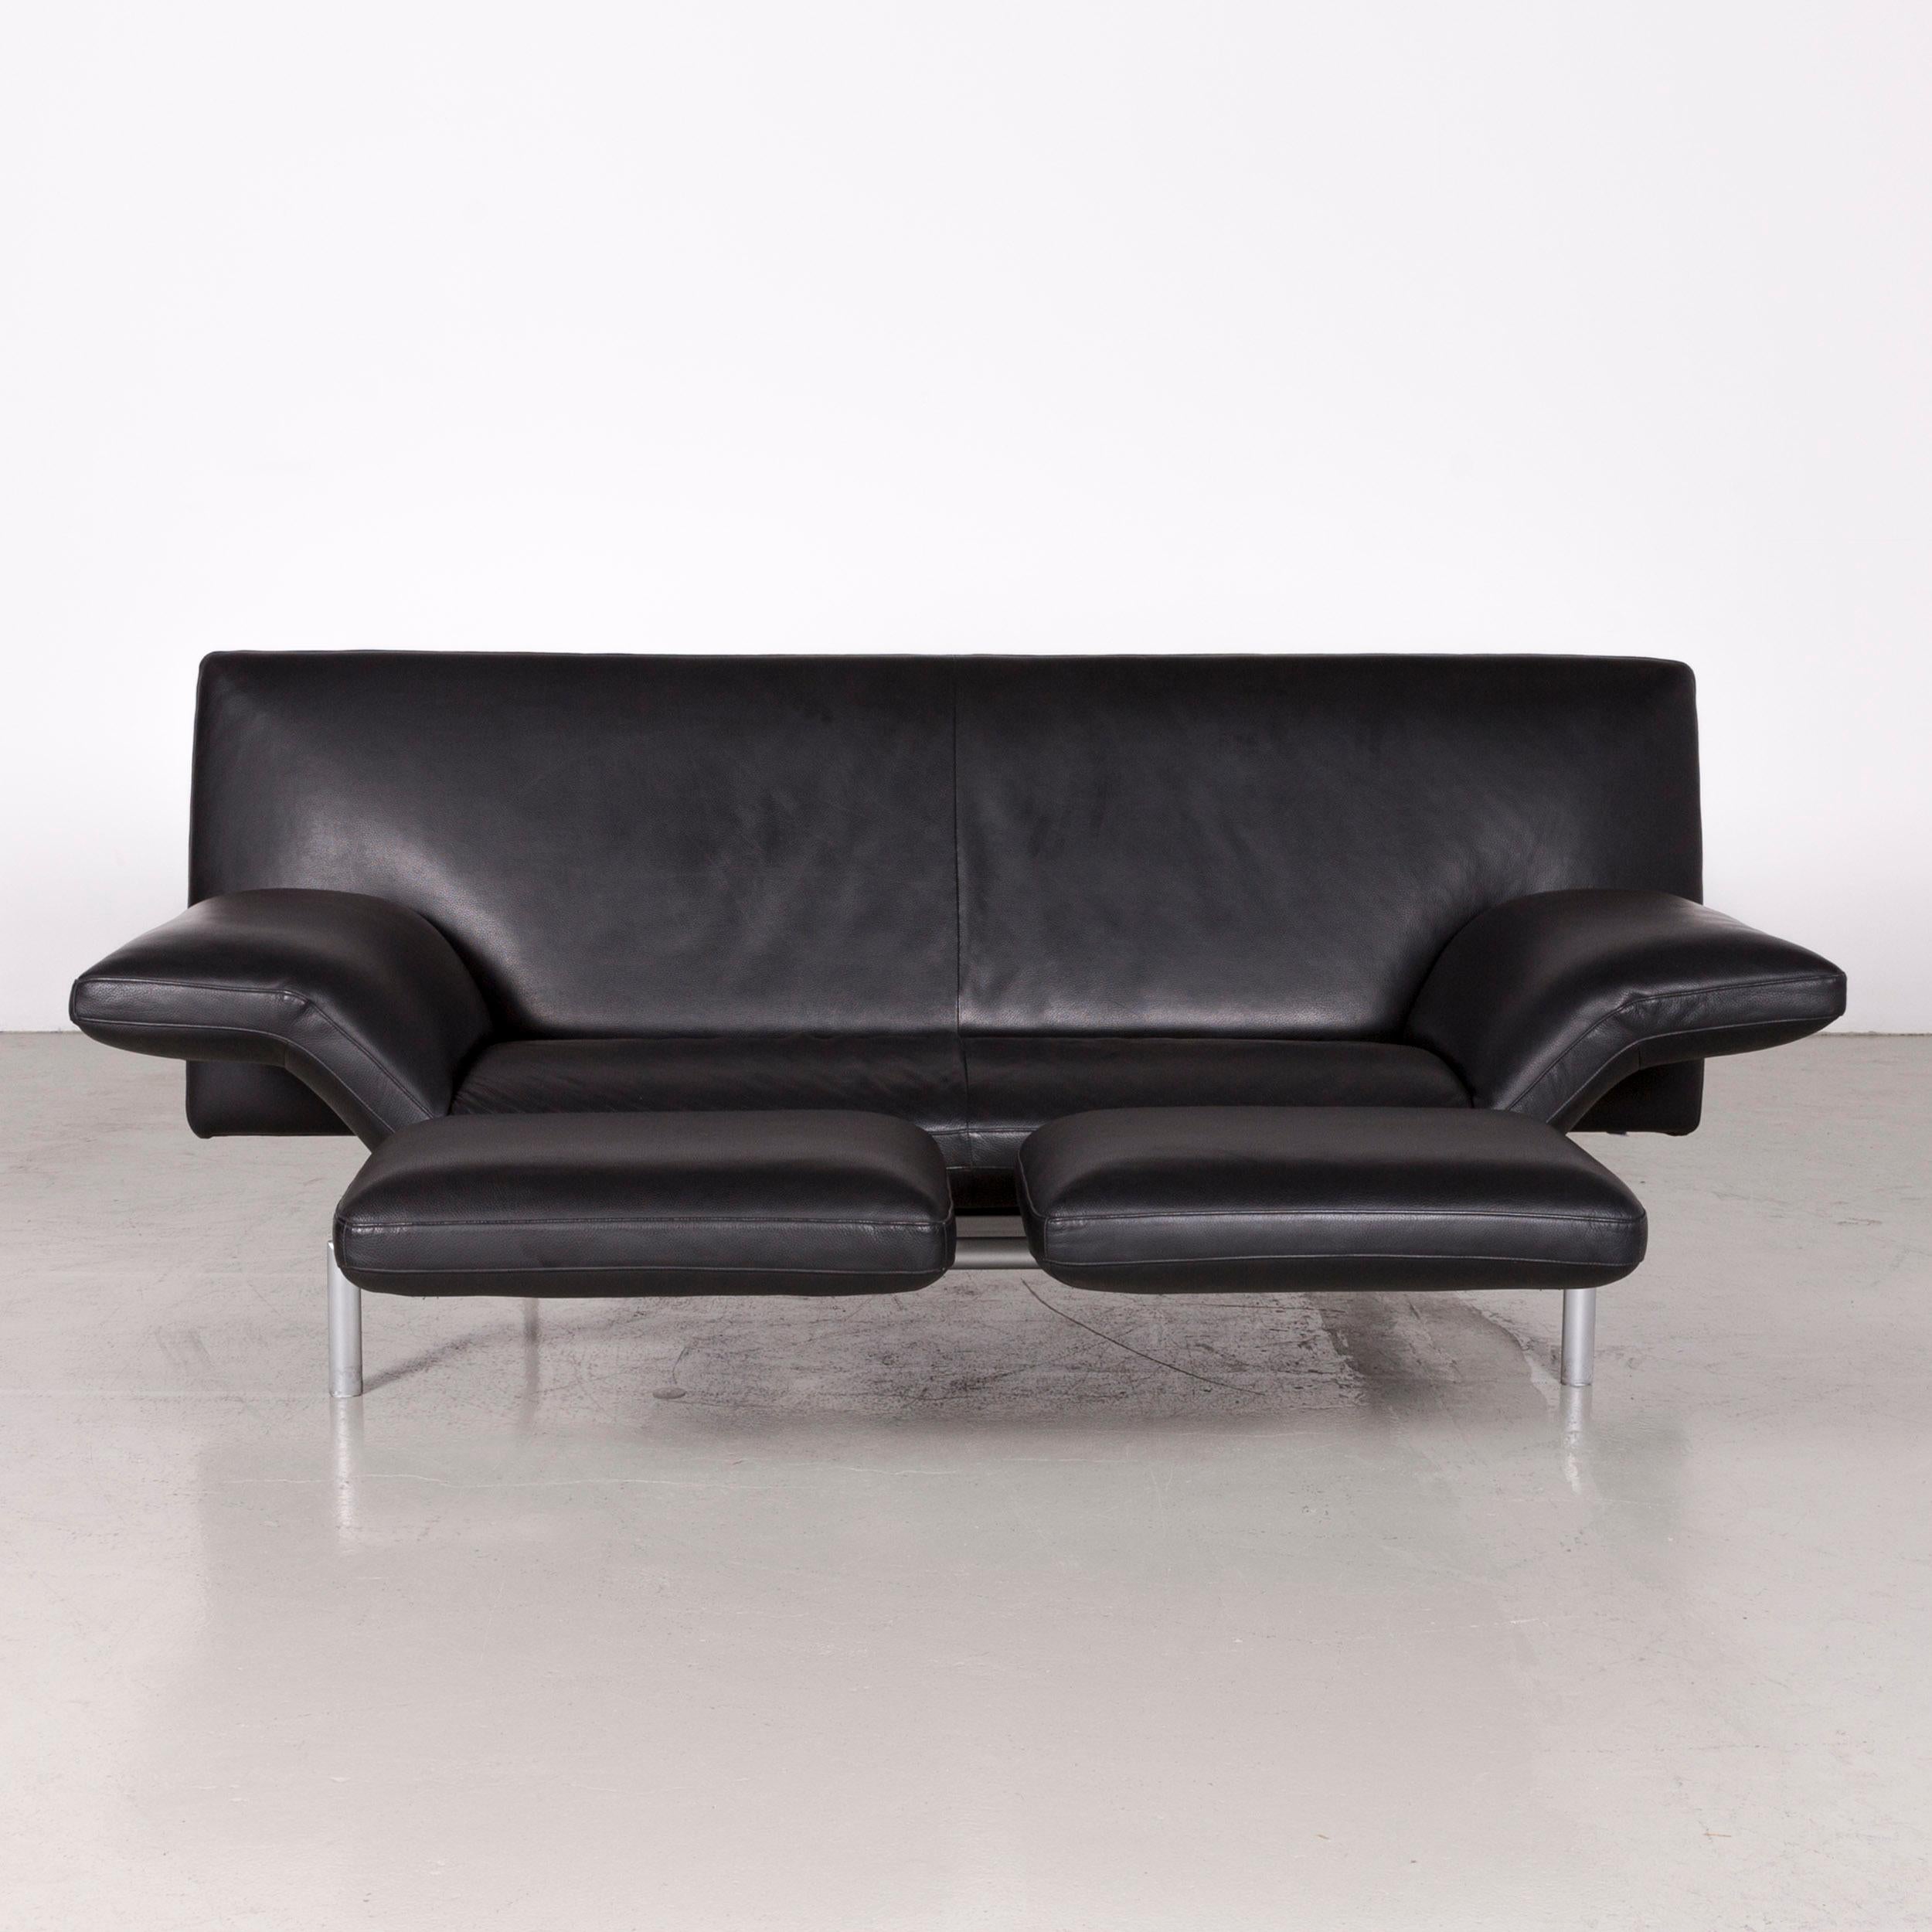 German Designo Flyer Designer Leather Sofa Black Three-Seat Couch with Function